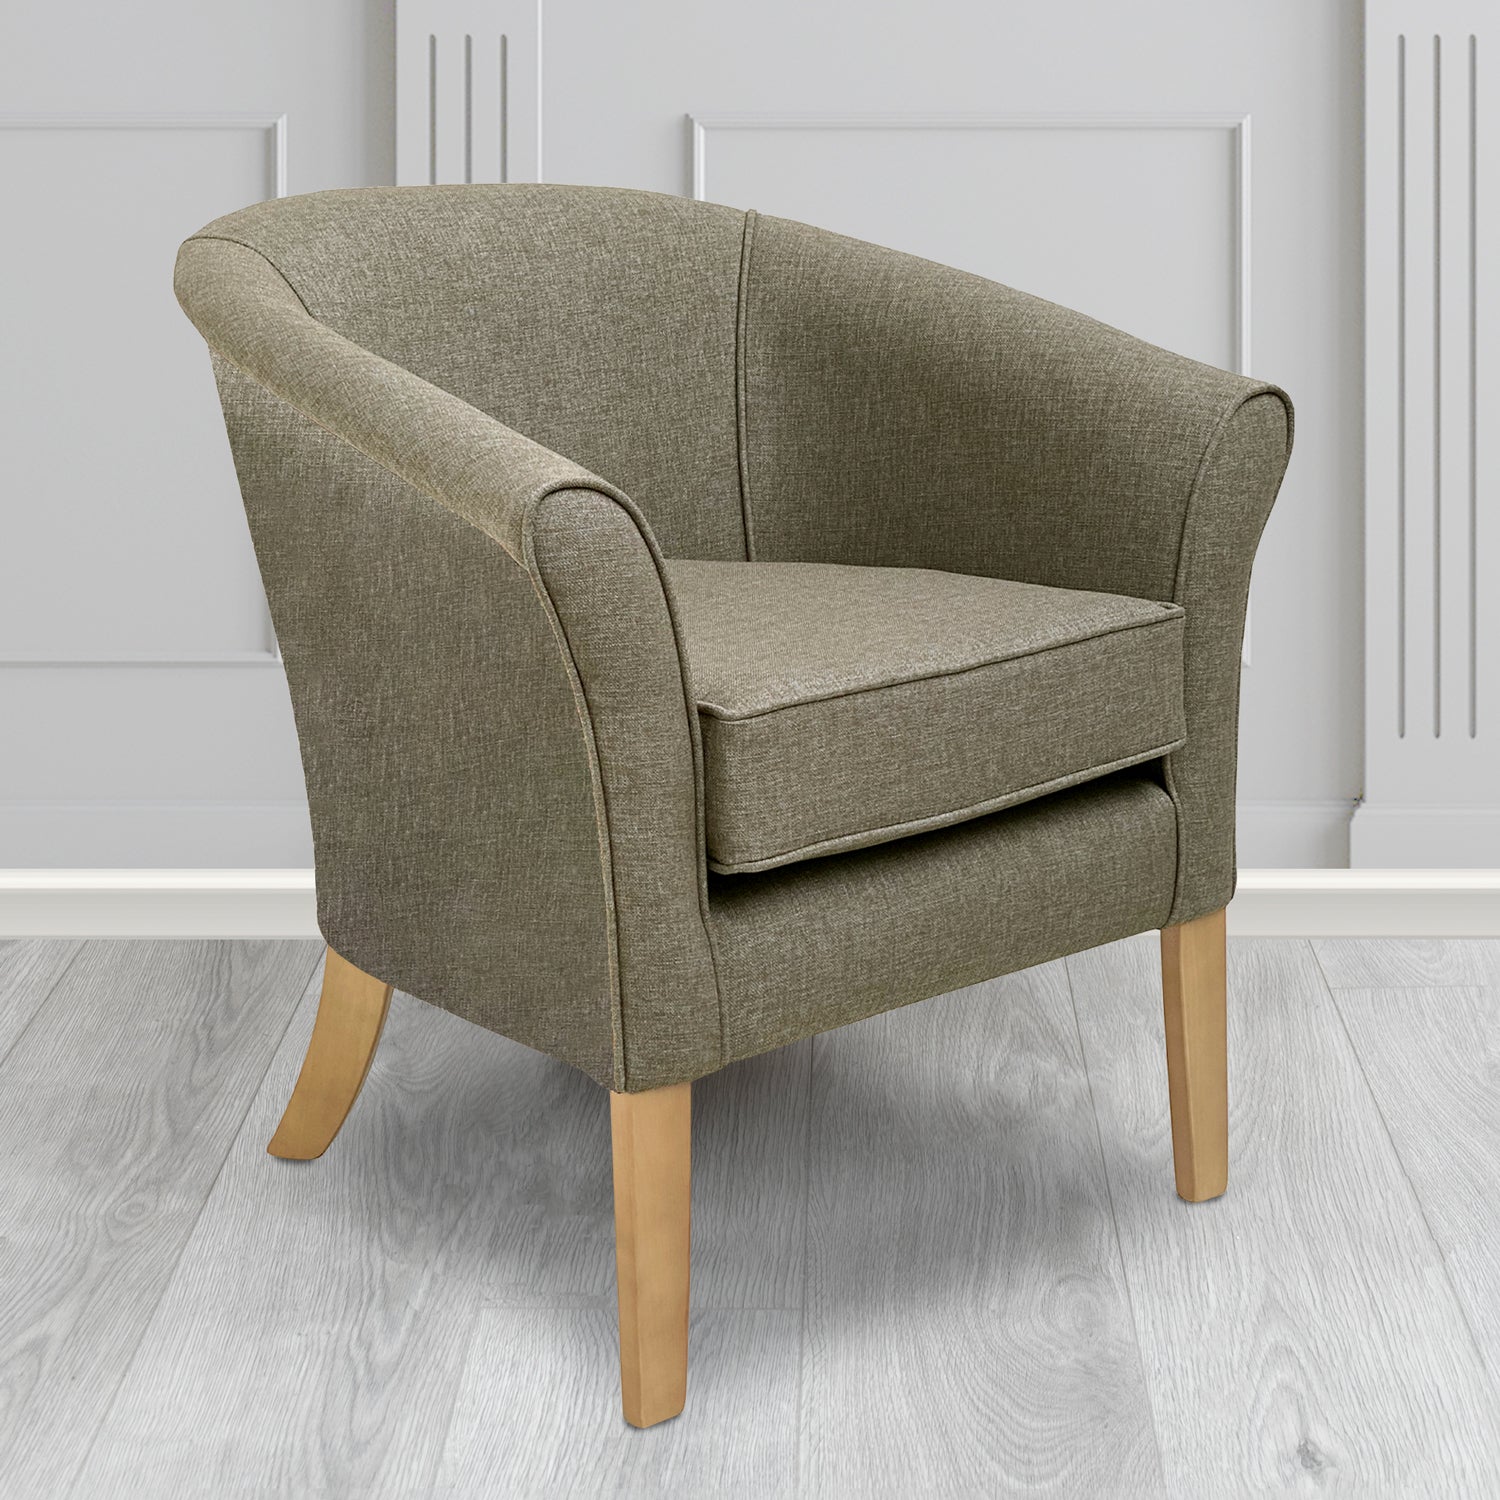 Aspen Tub Chair in Marna 835 Hessian Crib 5 Fabric - Antimicrobial, Stain Resistant & Waterproof - The Tub Chair Shop